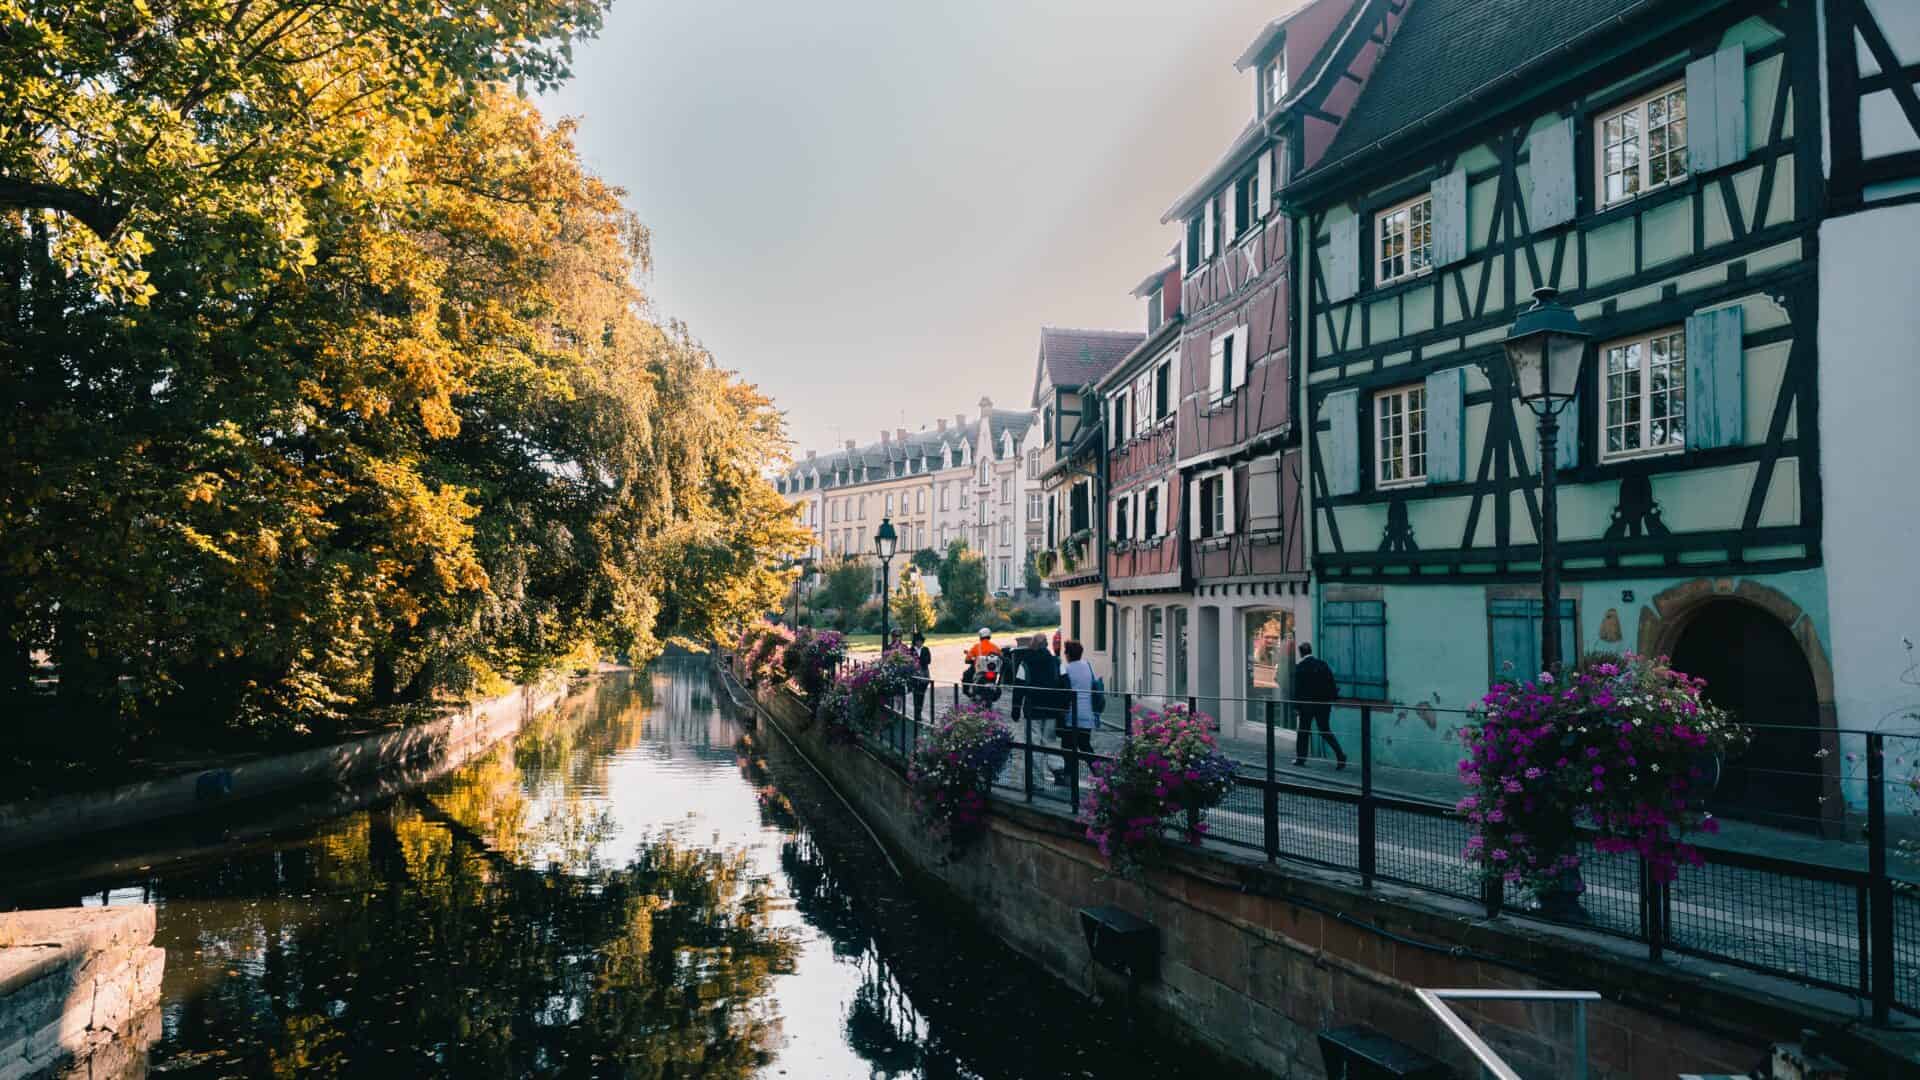 Sun reflecting over canal in Colmar